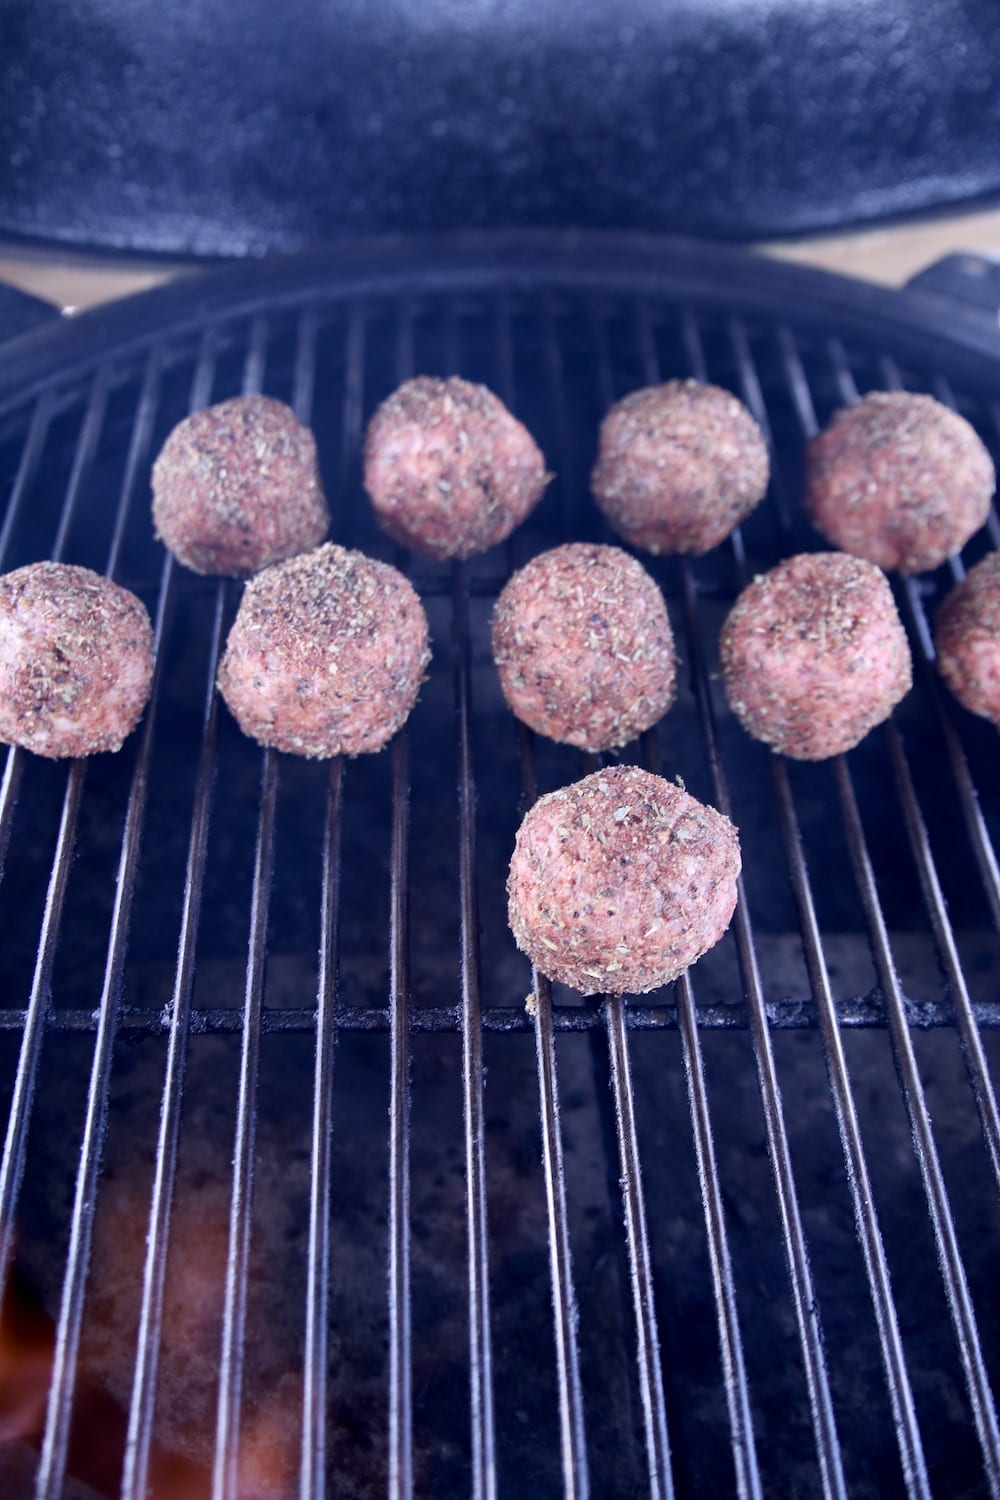 meatballs on a grill